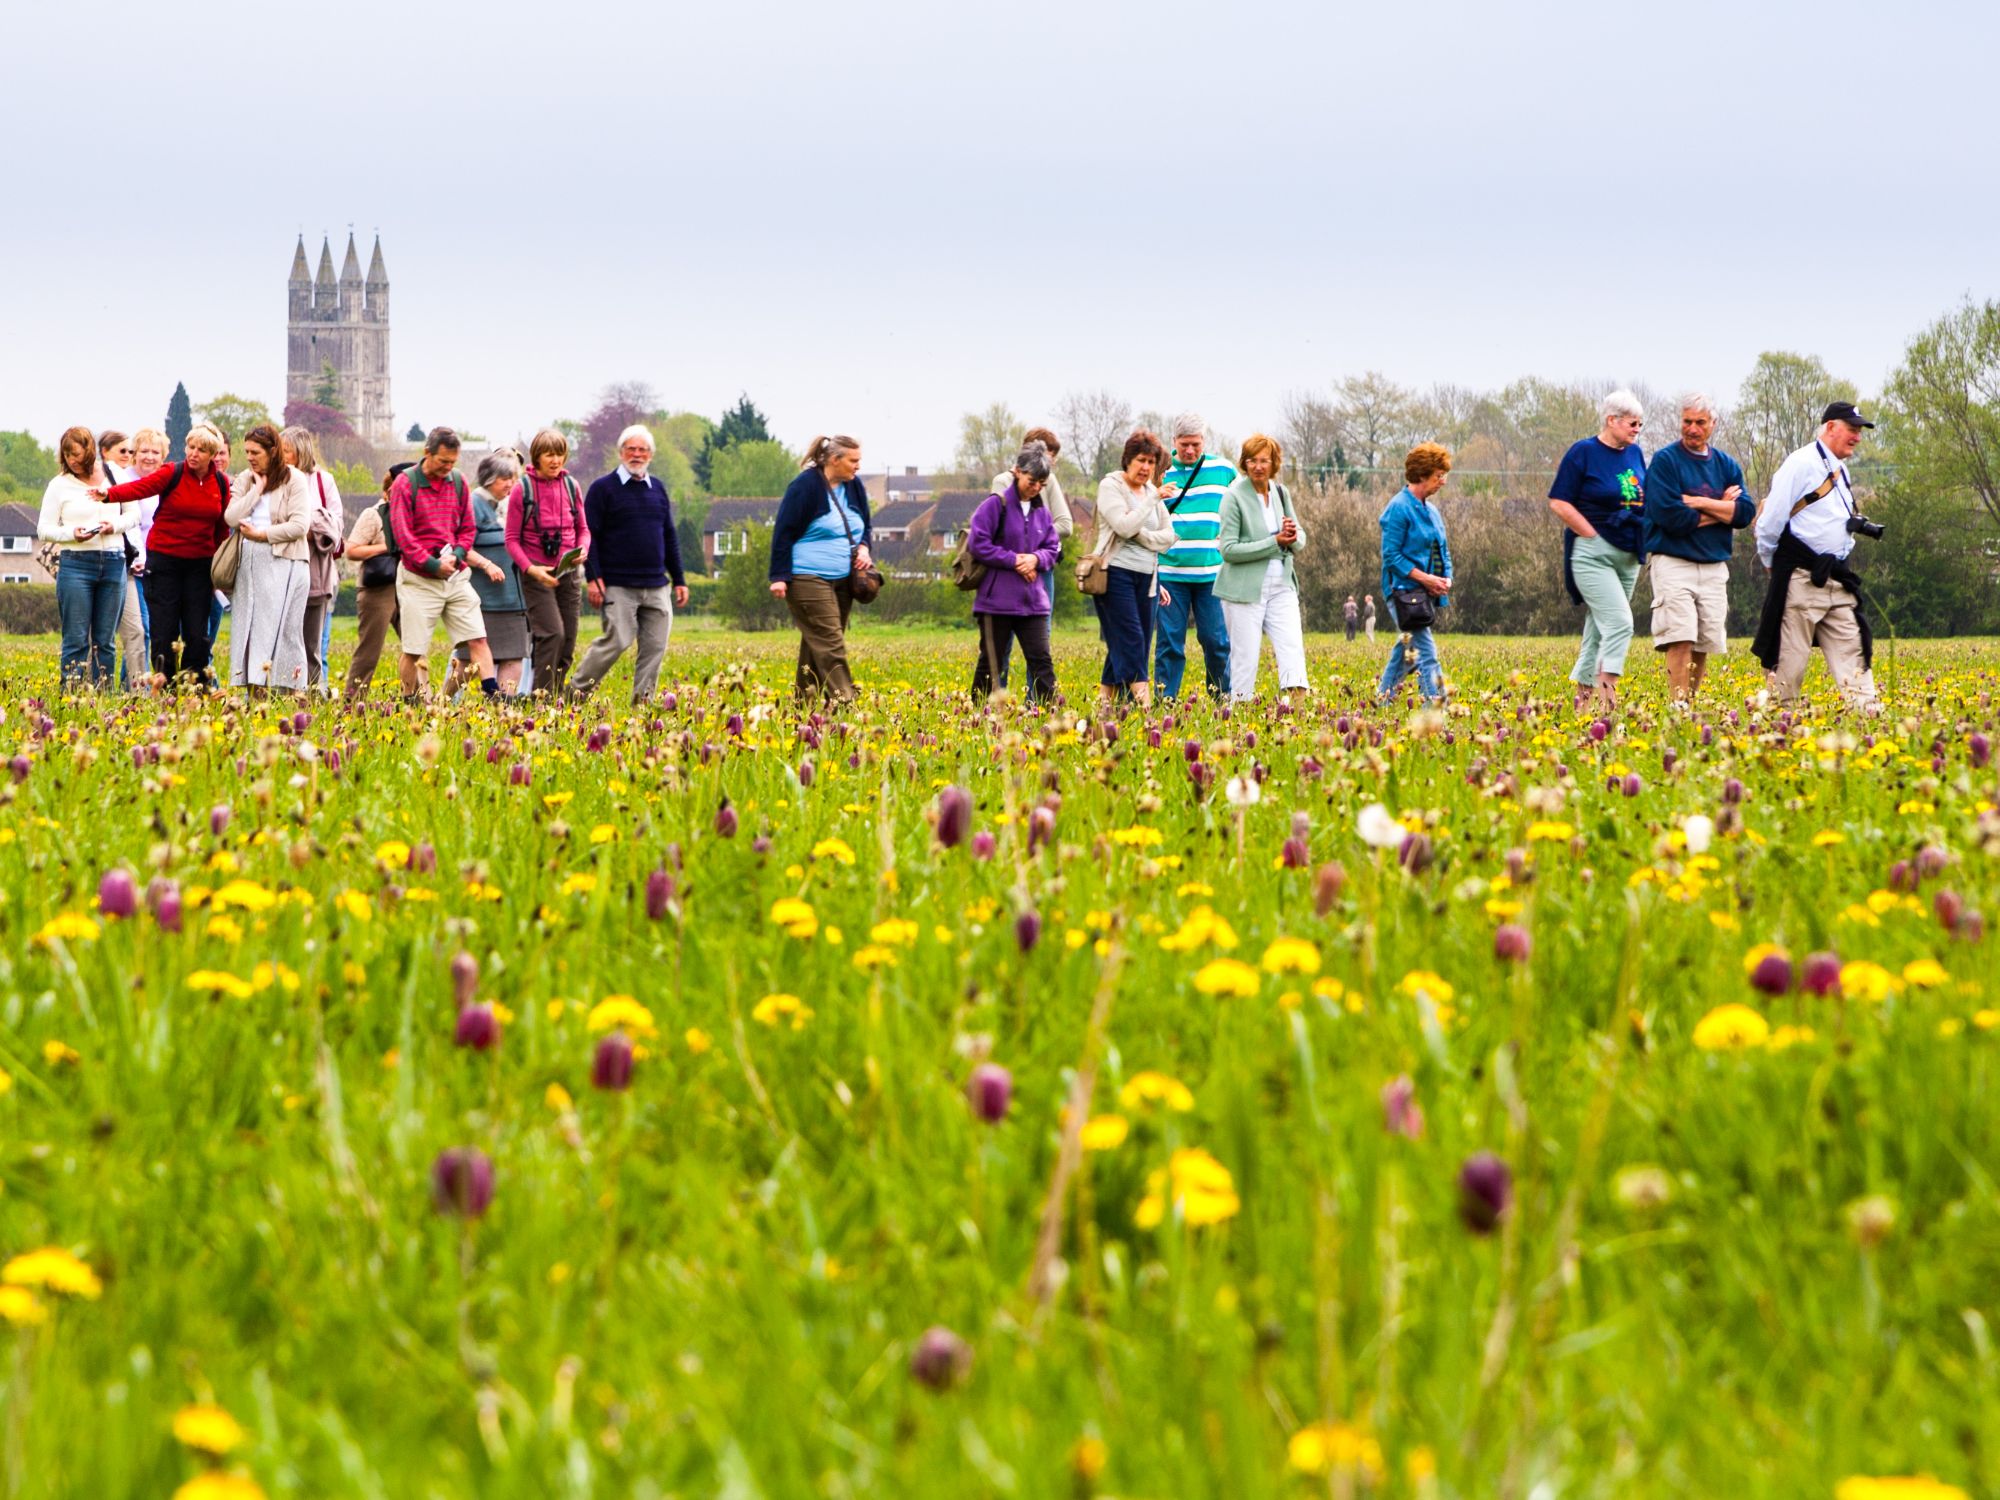 Image of people walking in a meadow - copyright Mike Dodds